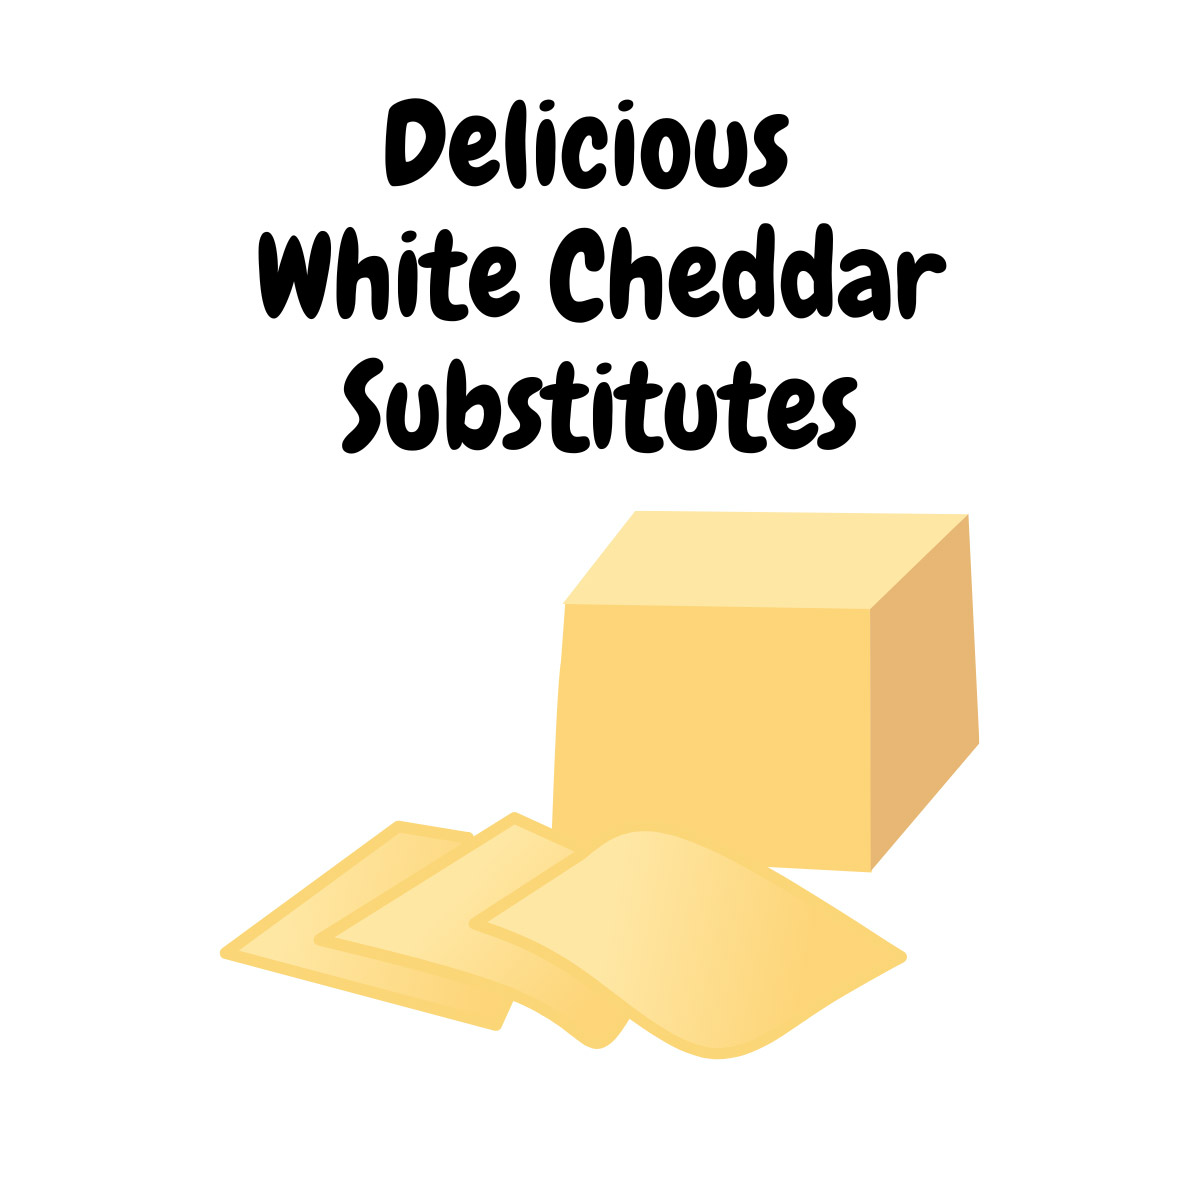 White Cheddar Substitutes featured image | Girl Meets Food